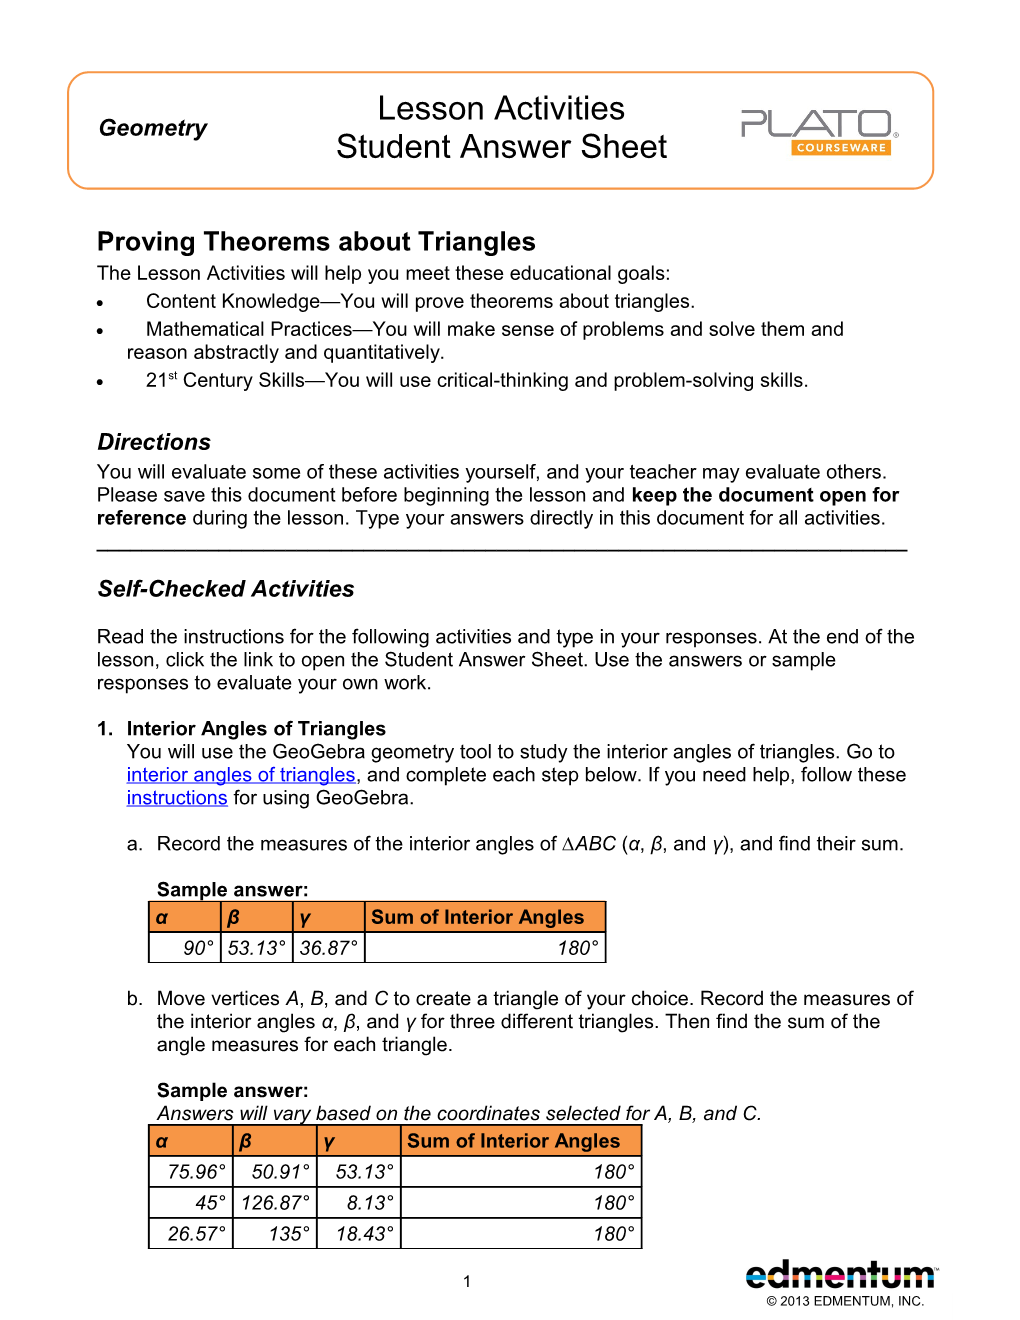 Proving Theorems About Triangles s1